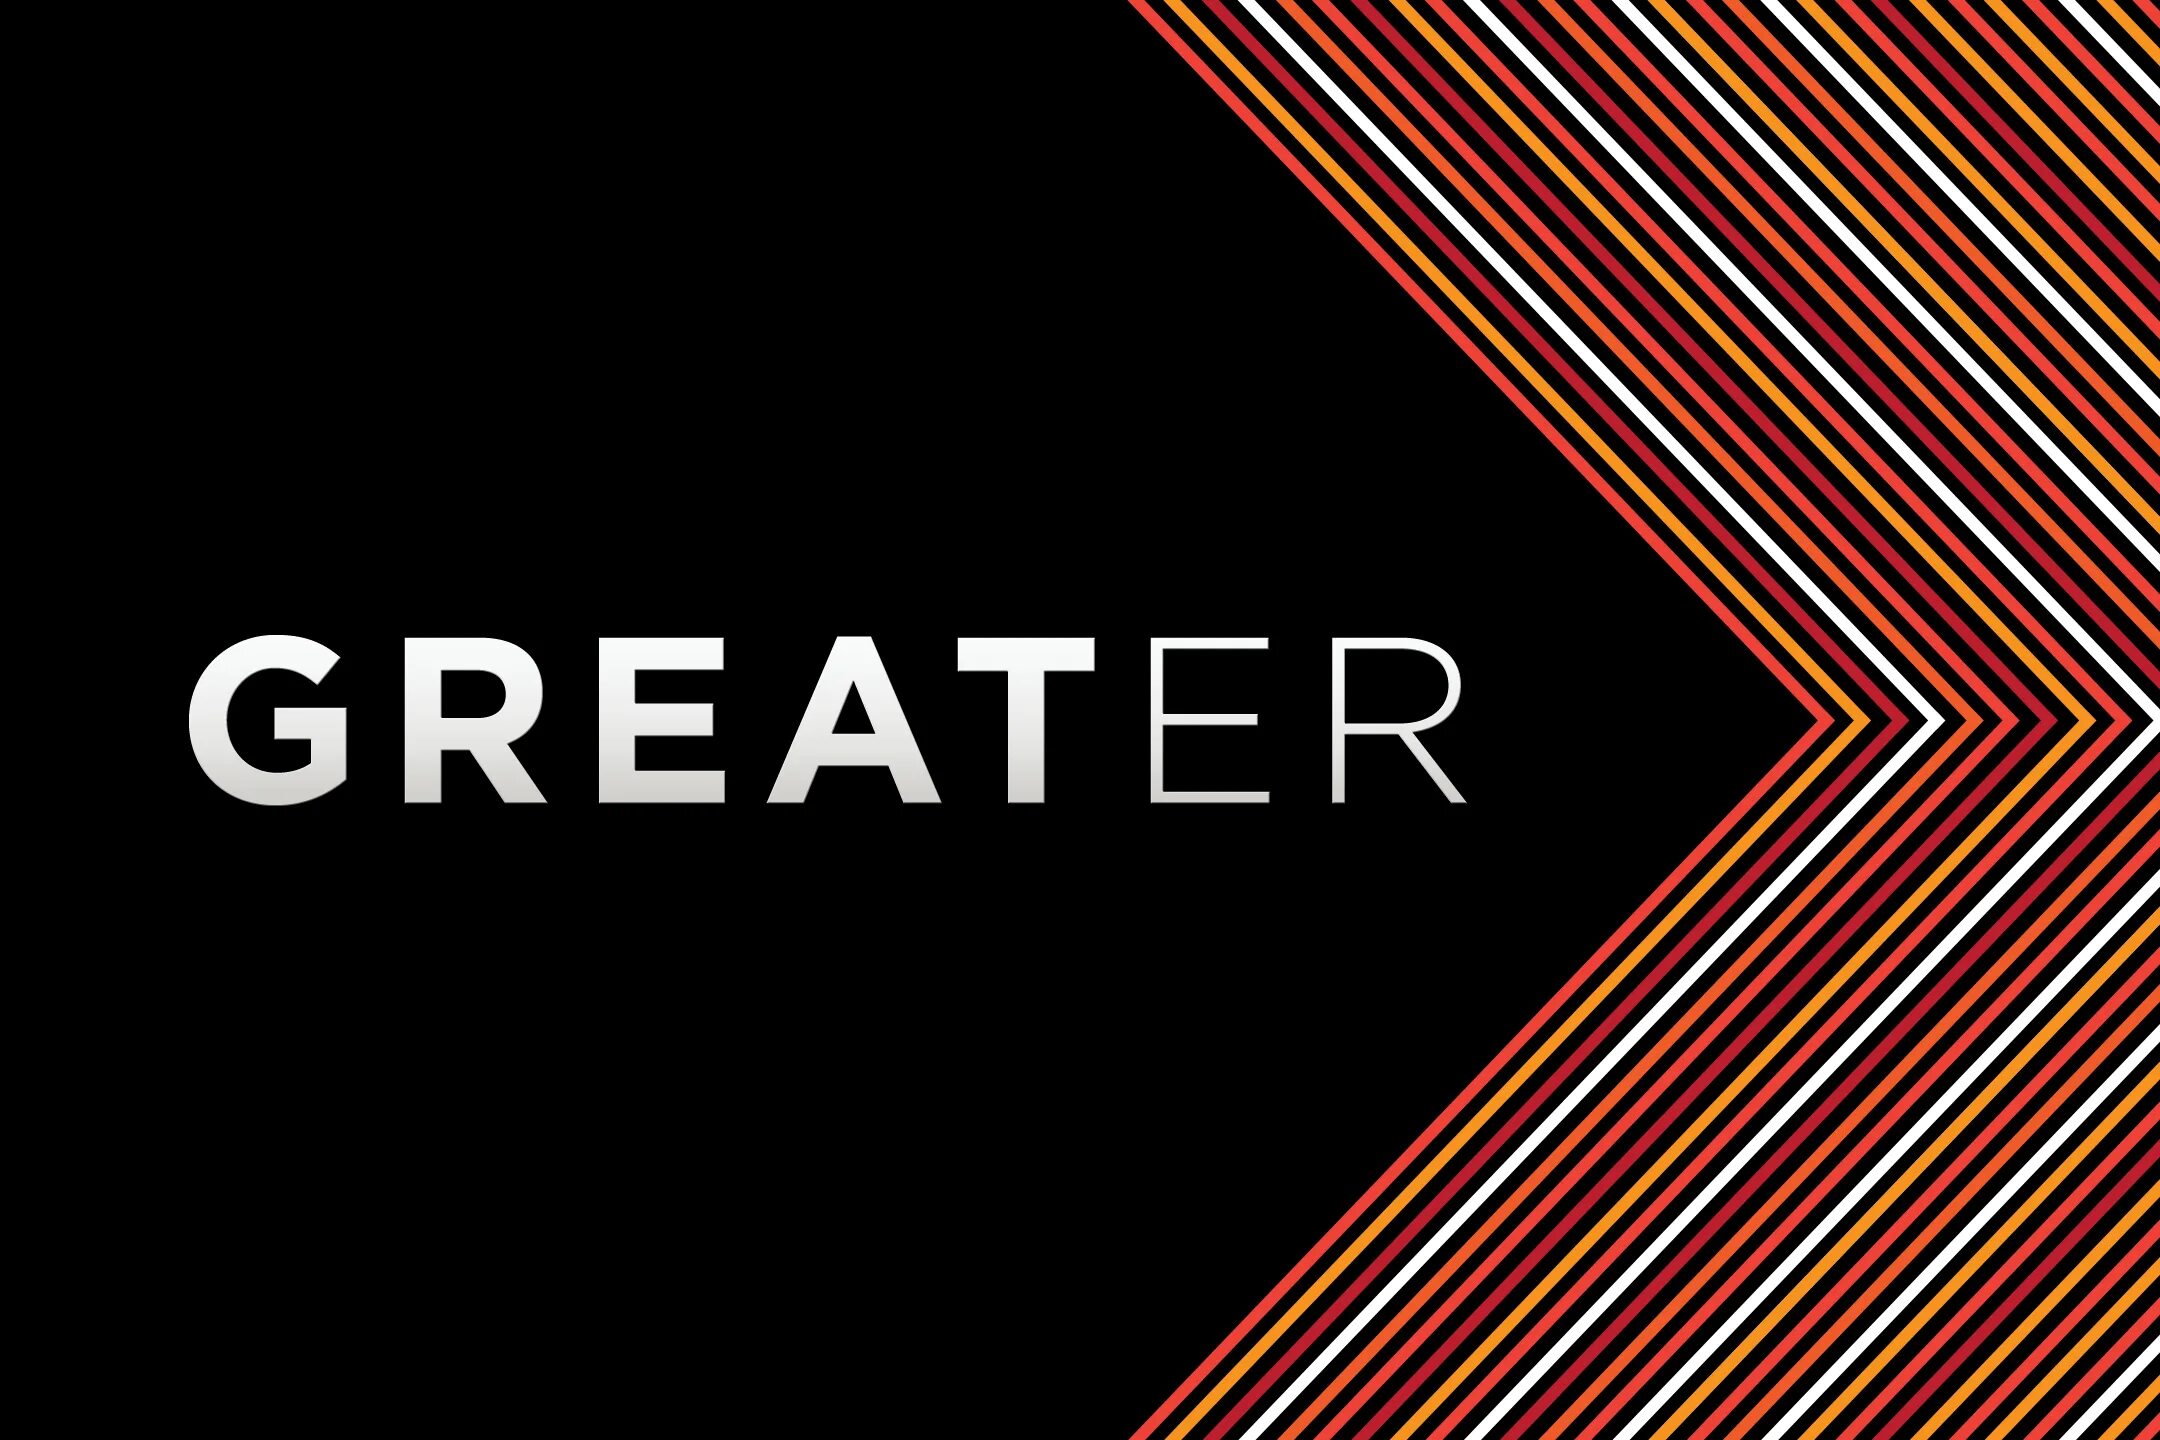 Greater. Be Greater. Be greater together